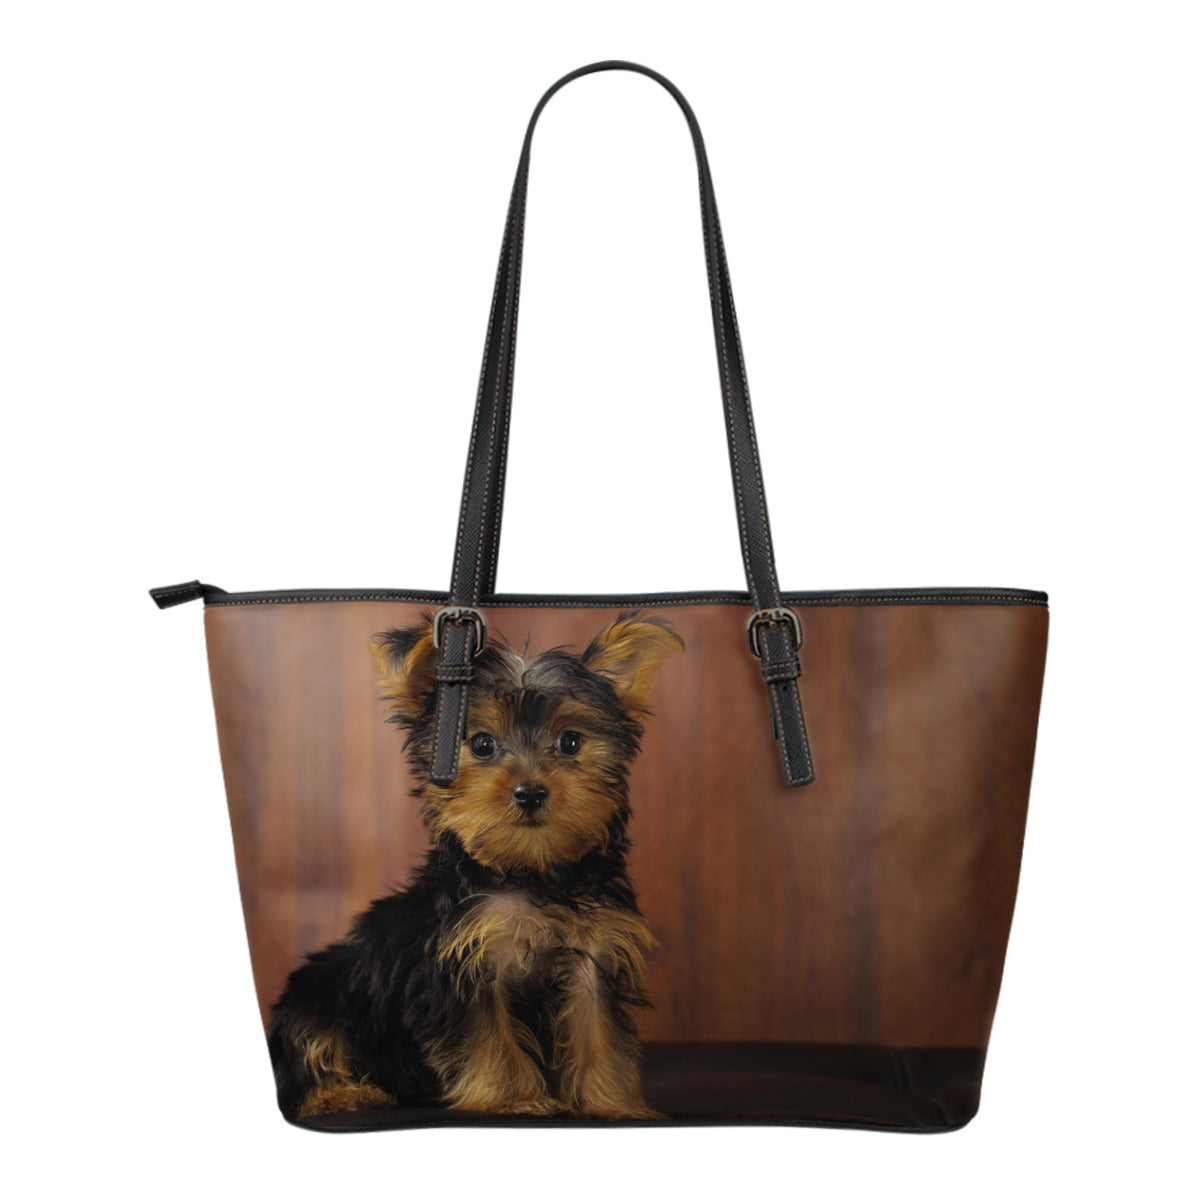 Yorkshire Terrier Tote Bag - Small